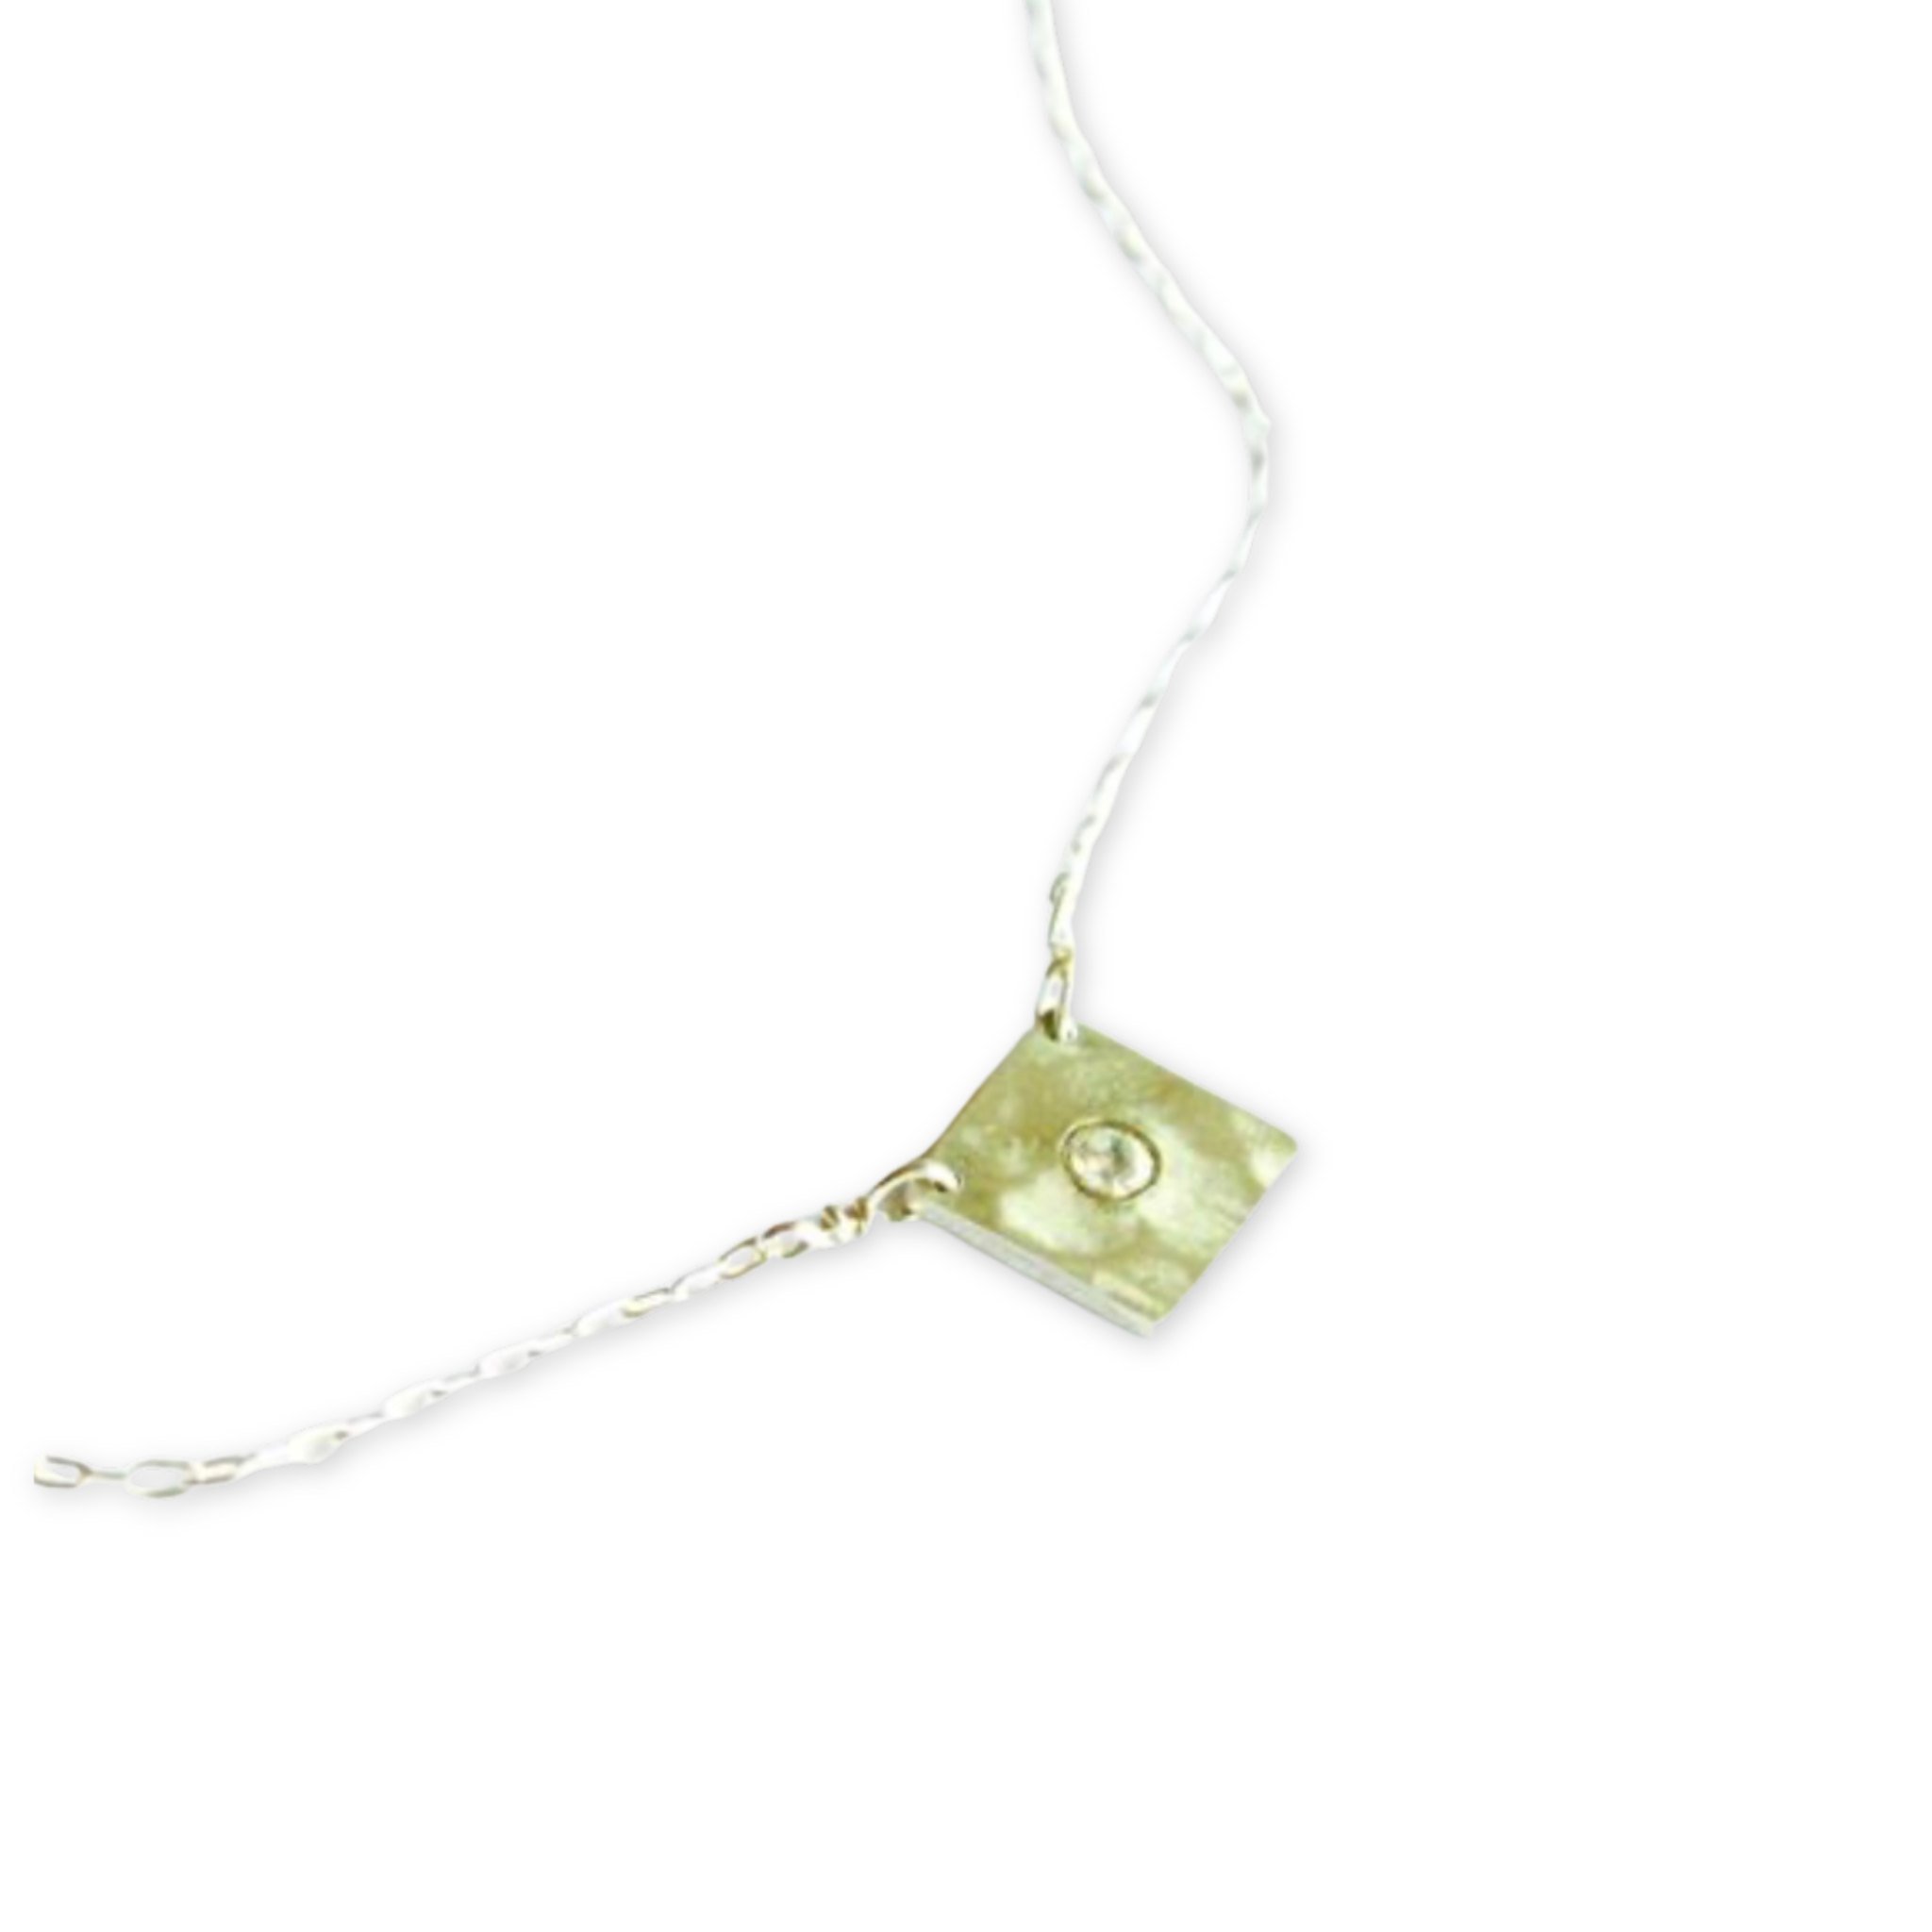 chain necklace with a small hammered square pendant featuring a swarovski cubic zirconia